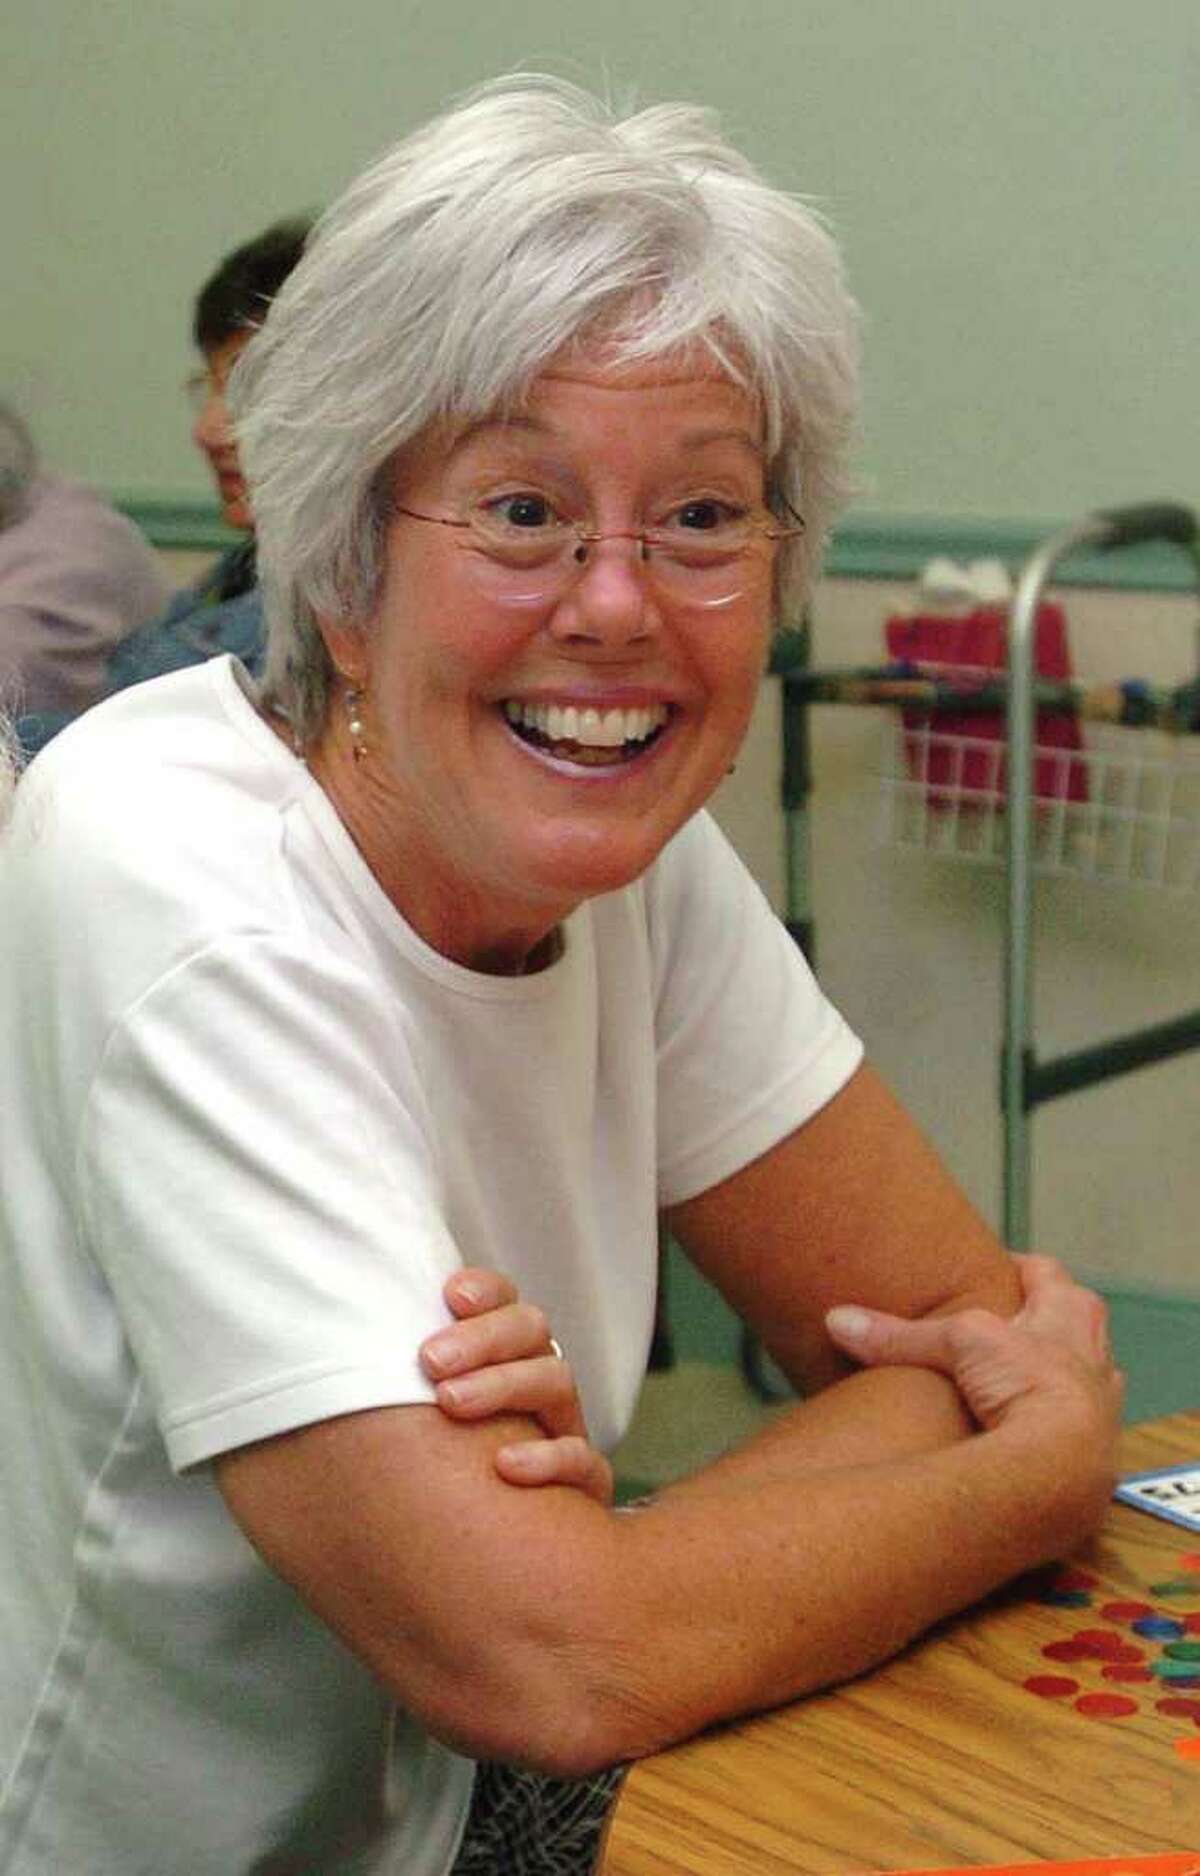 New Milford Senior Center director to retire in March